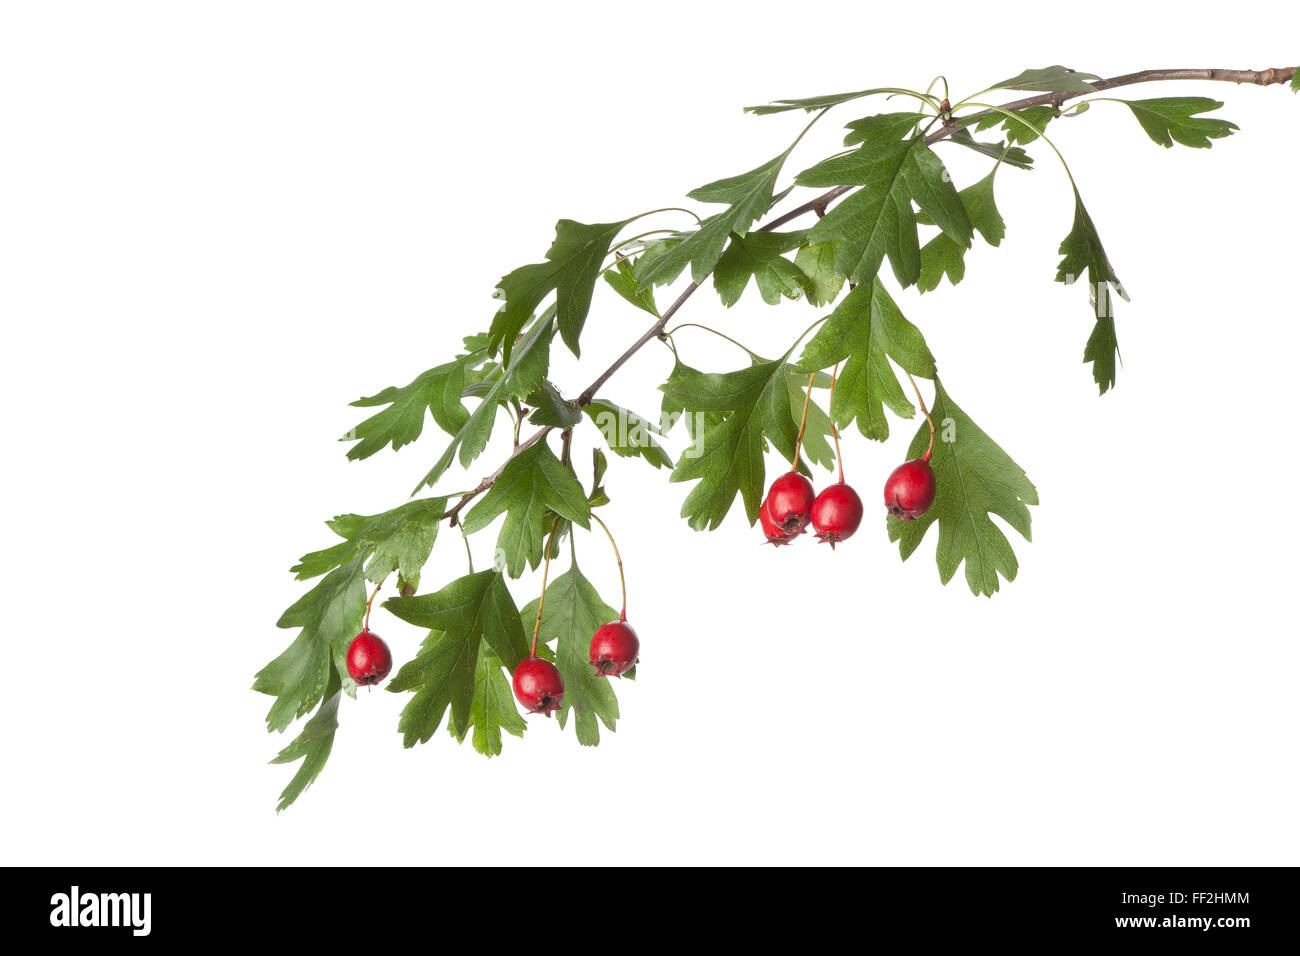 Twig of fresh hawthorn with red berries on white background Stock Photo